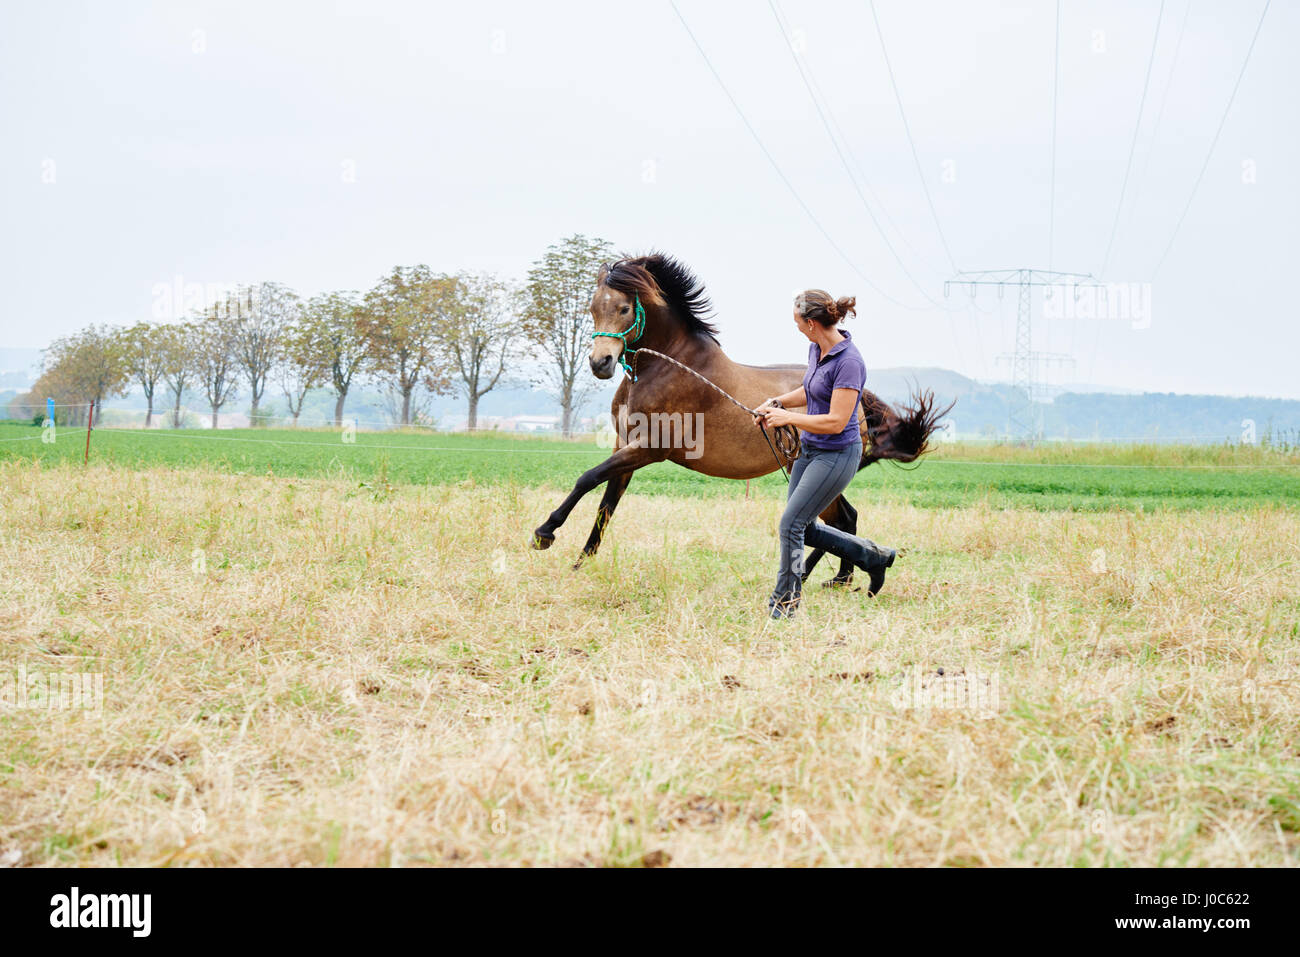 Woman running and leading horse while training in field Stock Photo